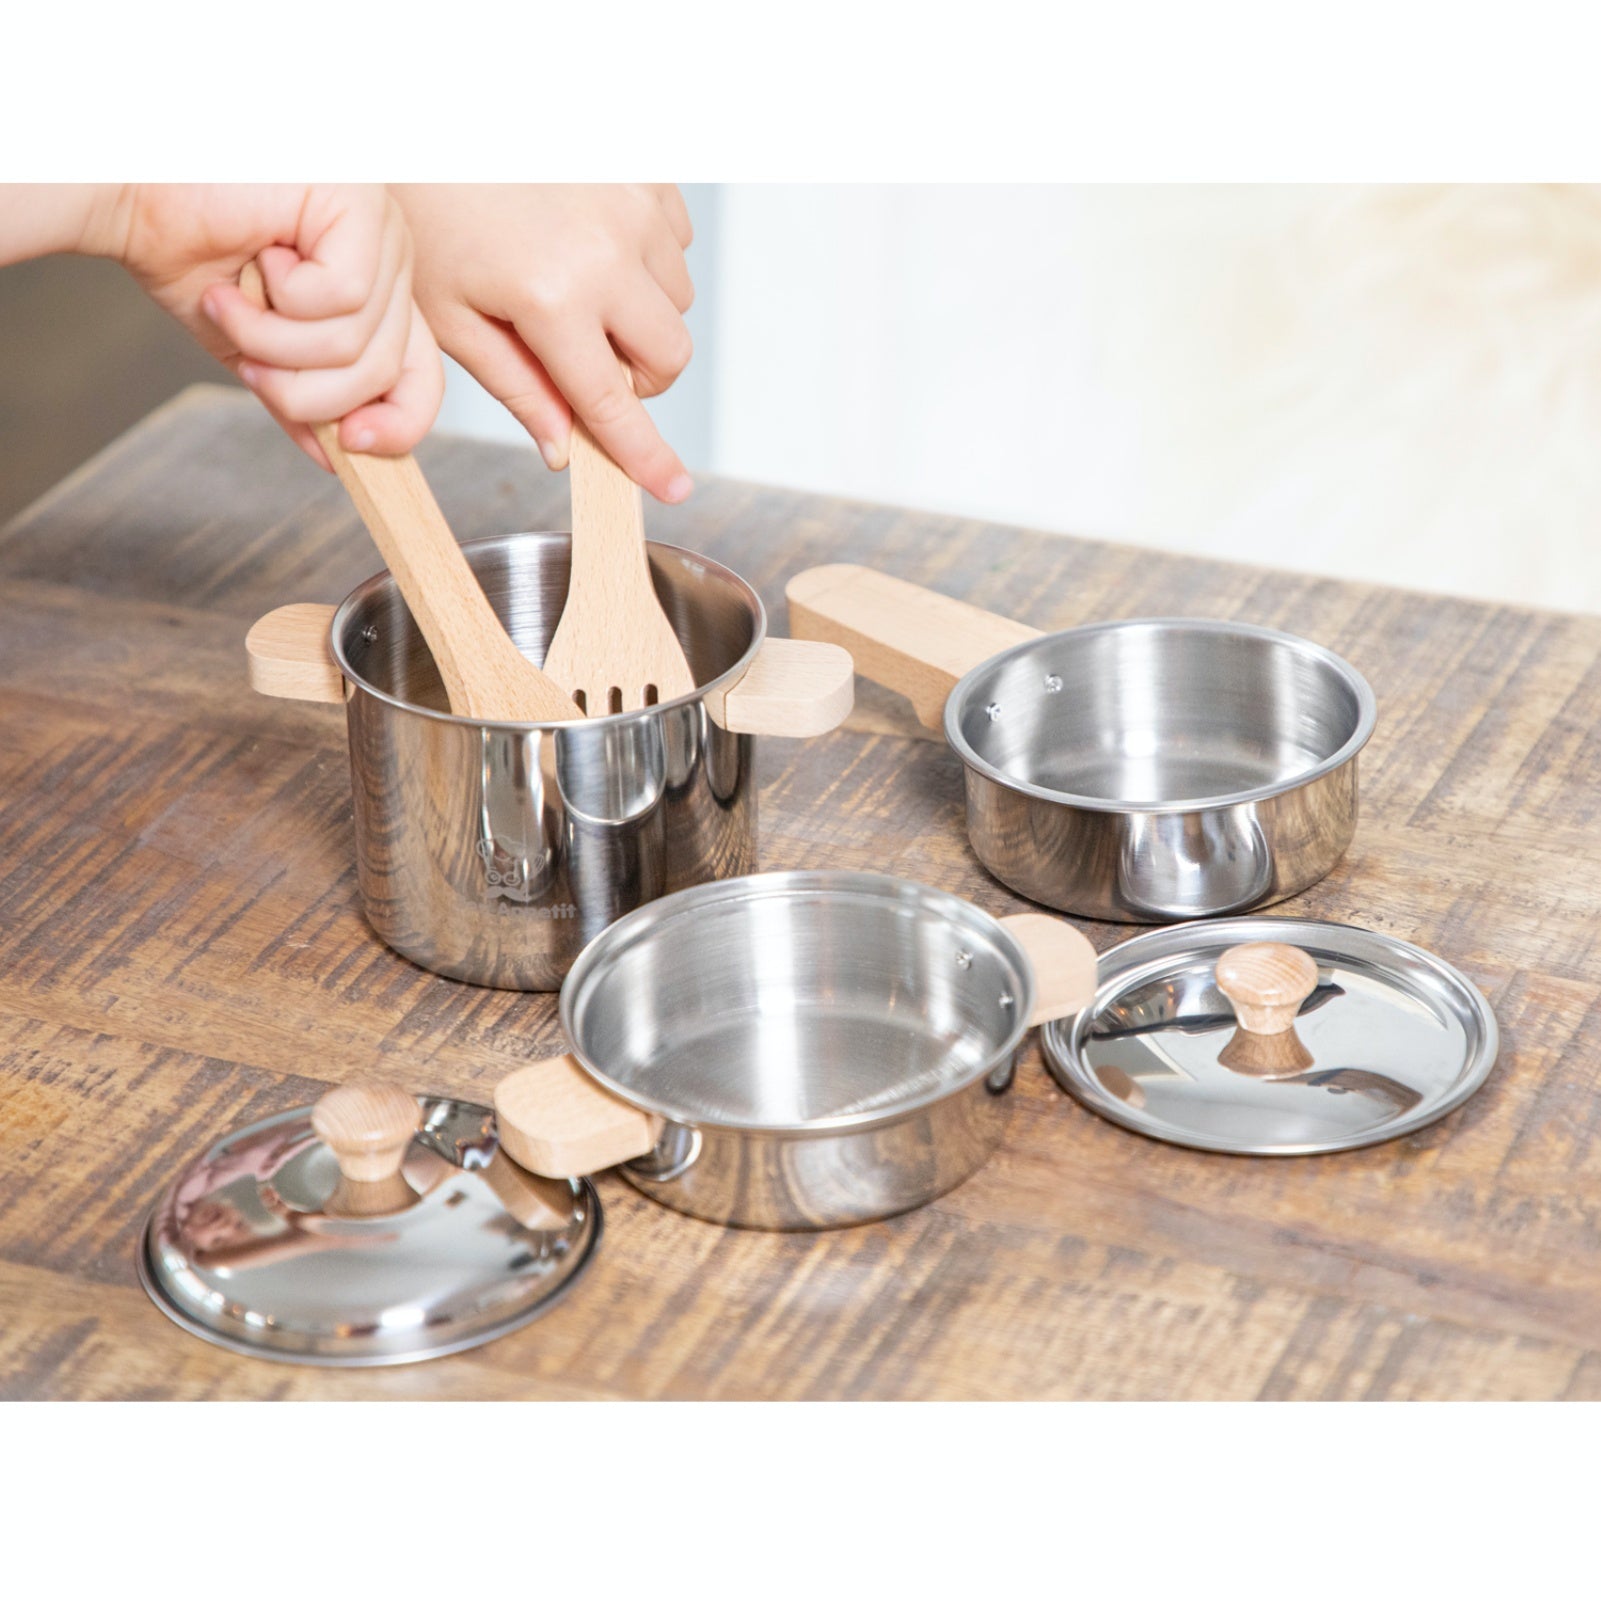 New Classic Pan Set Play Set | Pretend Play Kitchen Toys | Lifestyle – Girl Playing Close-Up | BeoVERDE.ie